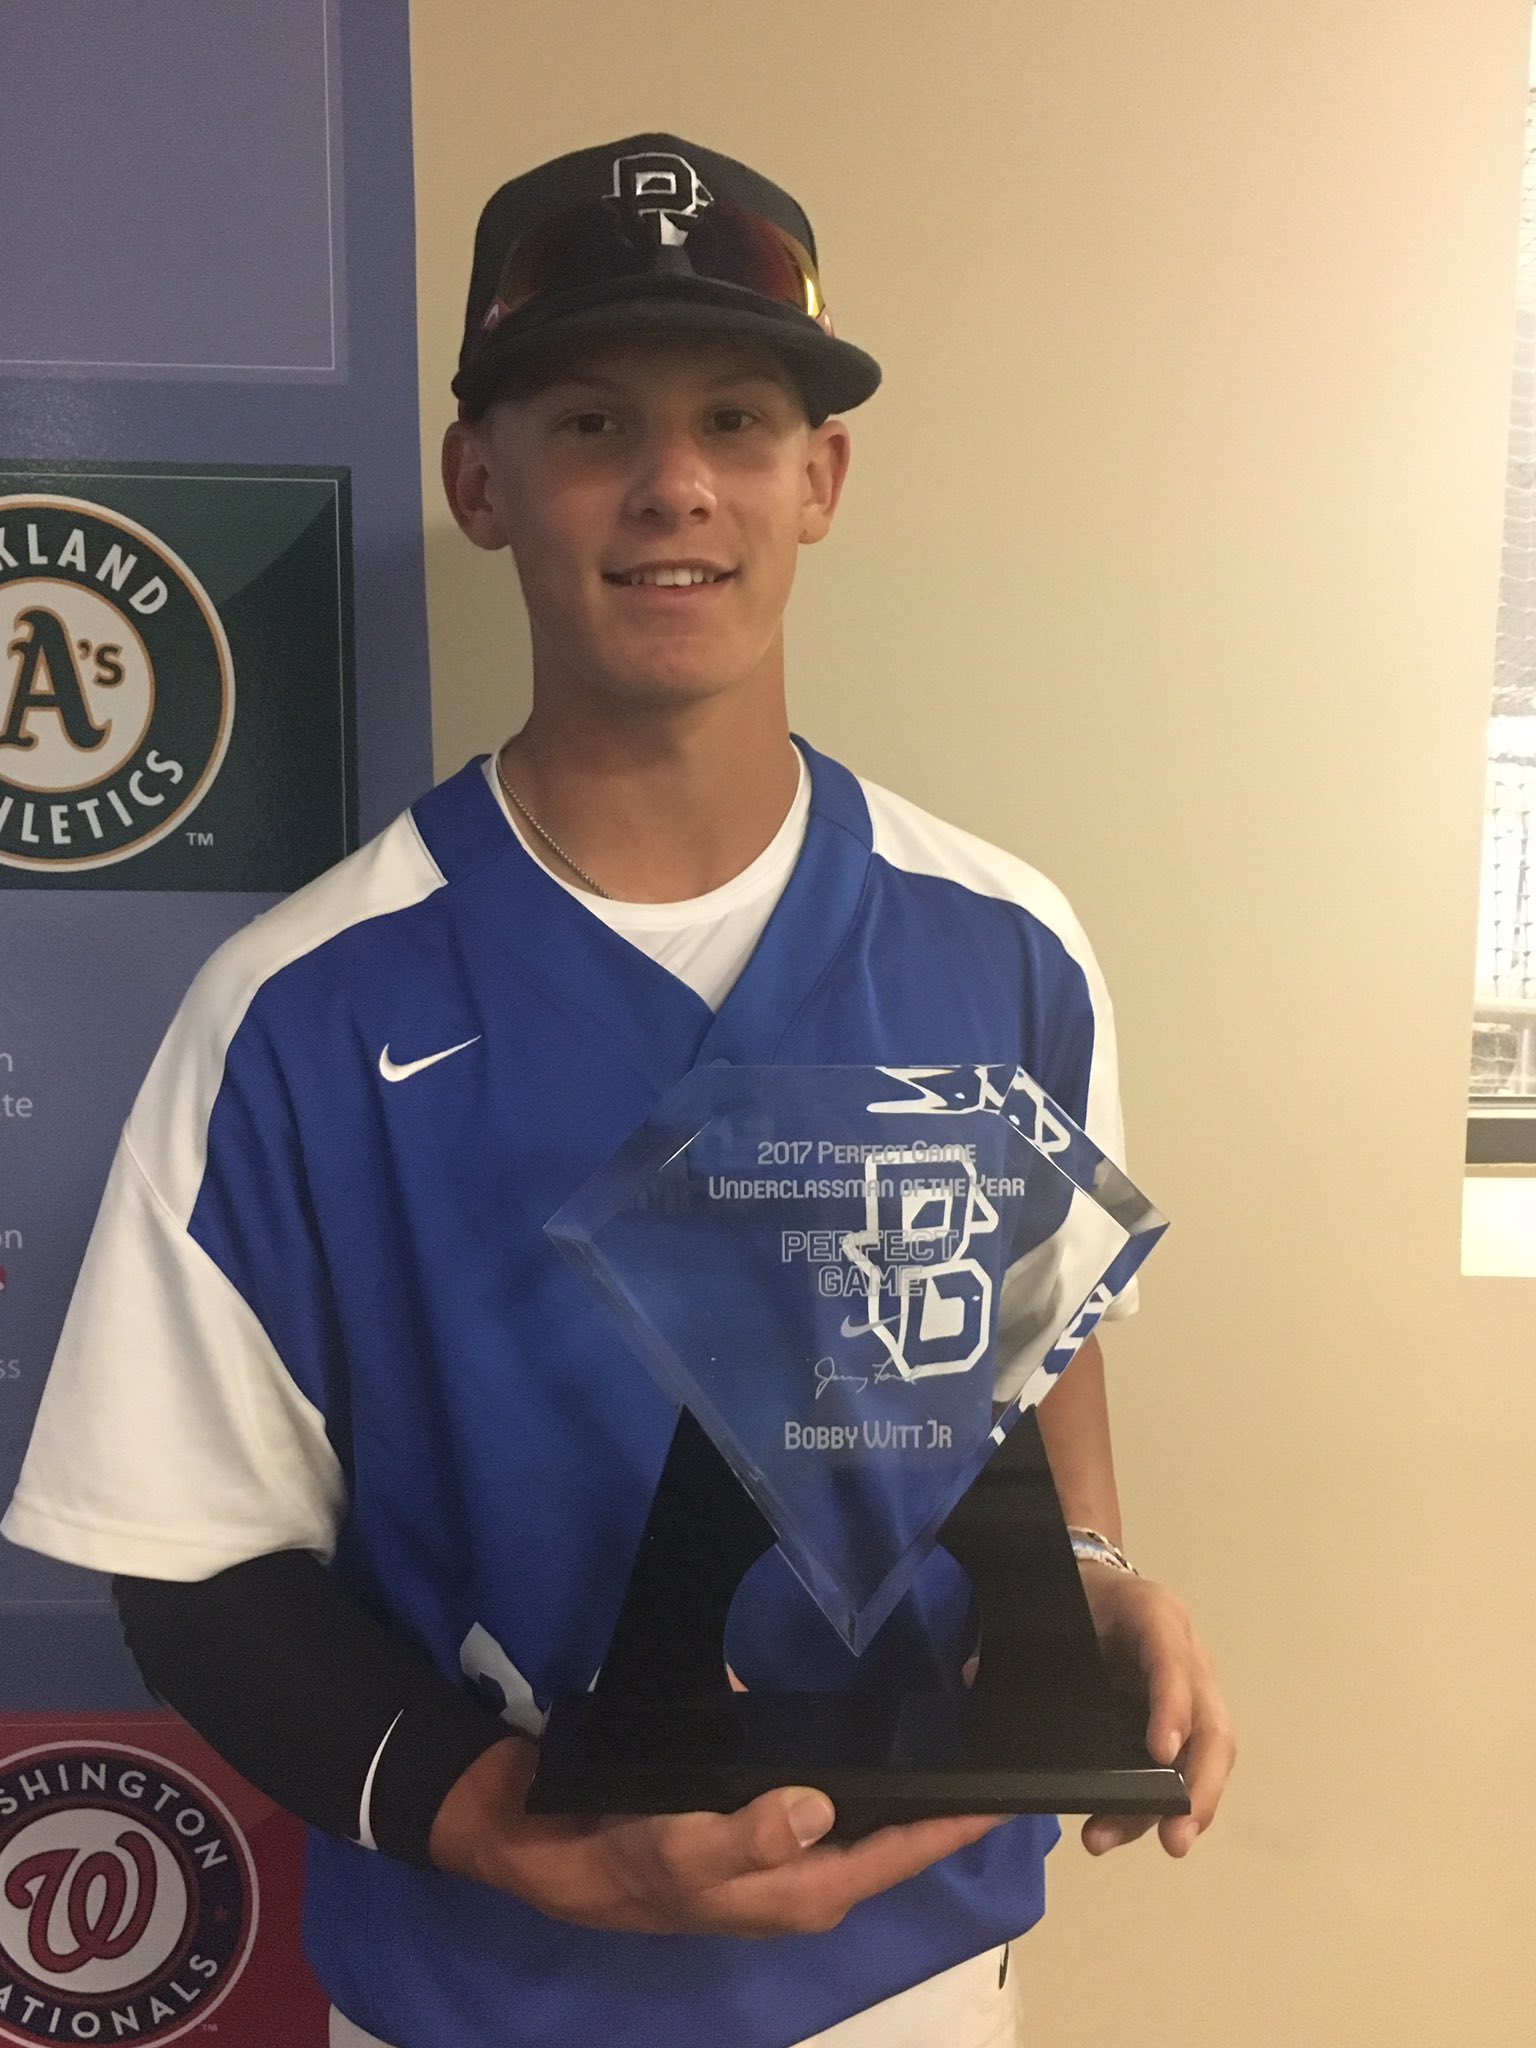 Perfect Game USA on X: We wrap up a great week in San Diego naming the  2017 PG Underclassmen of the Year Bobby Witt Jr! Special player    / X